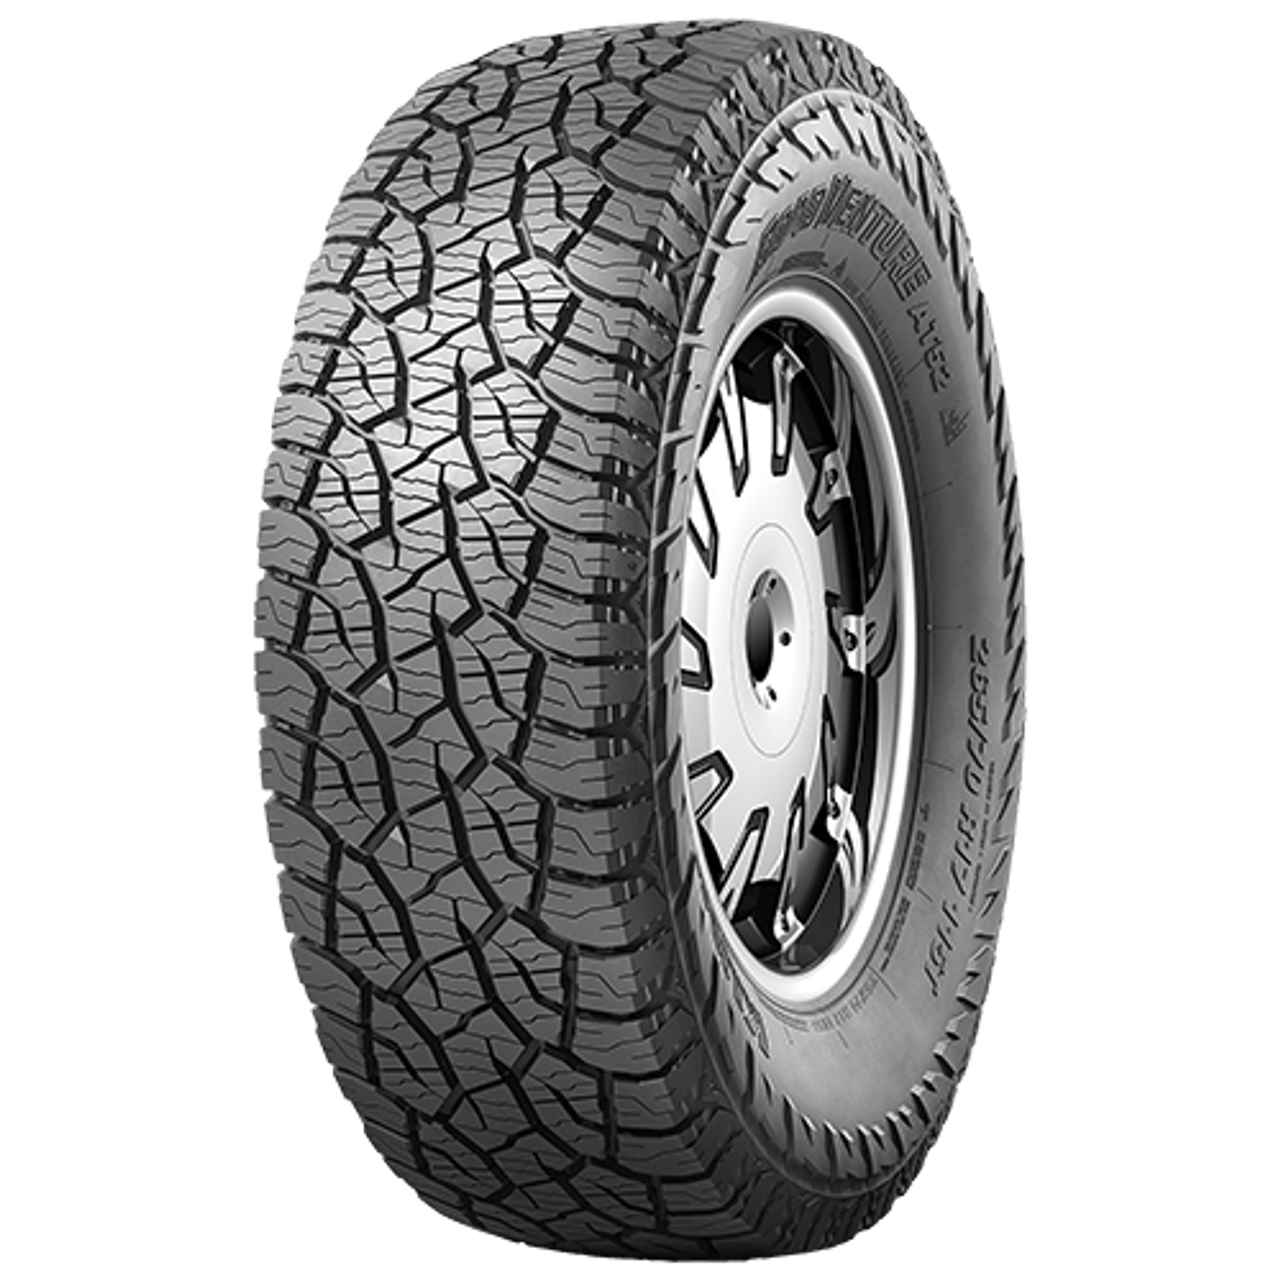 KUMHO ROAD VENTURE AT52 265/60R18 110T BSW